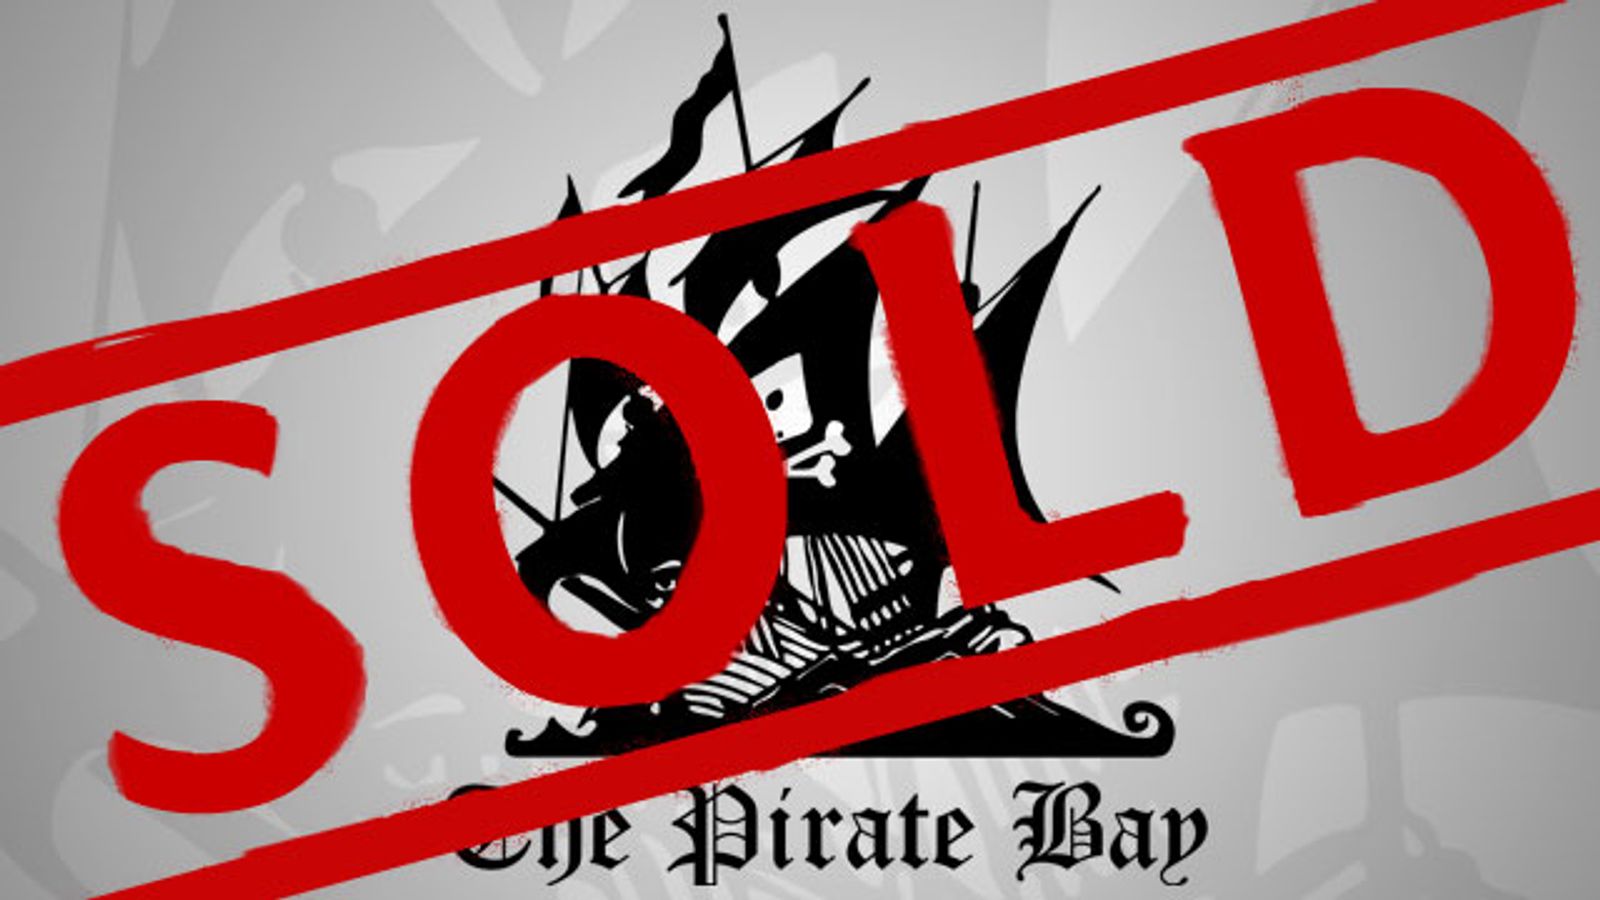 Pirate Bay Sold for $7.7m to Swedish Software Company